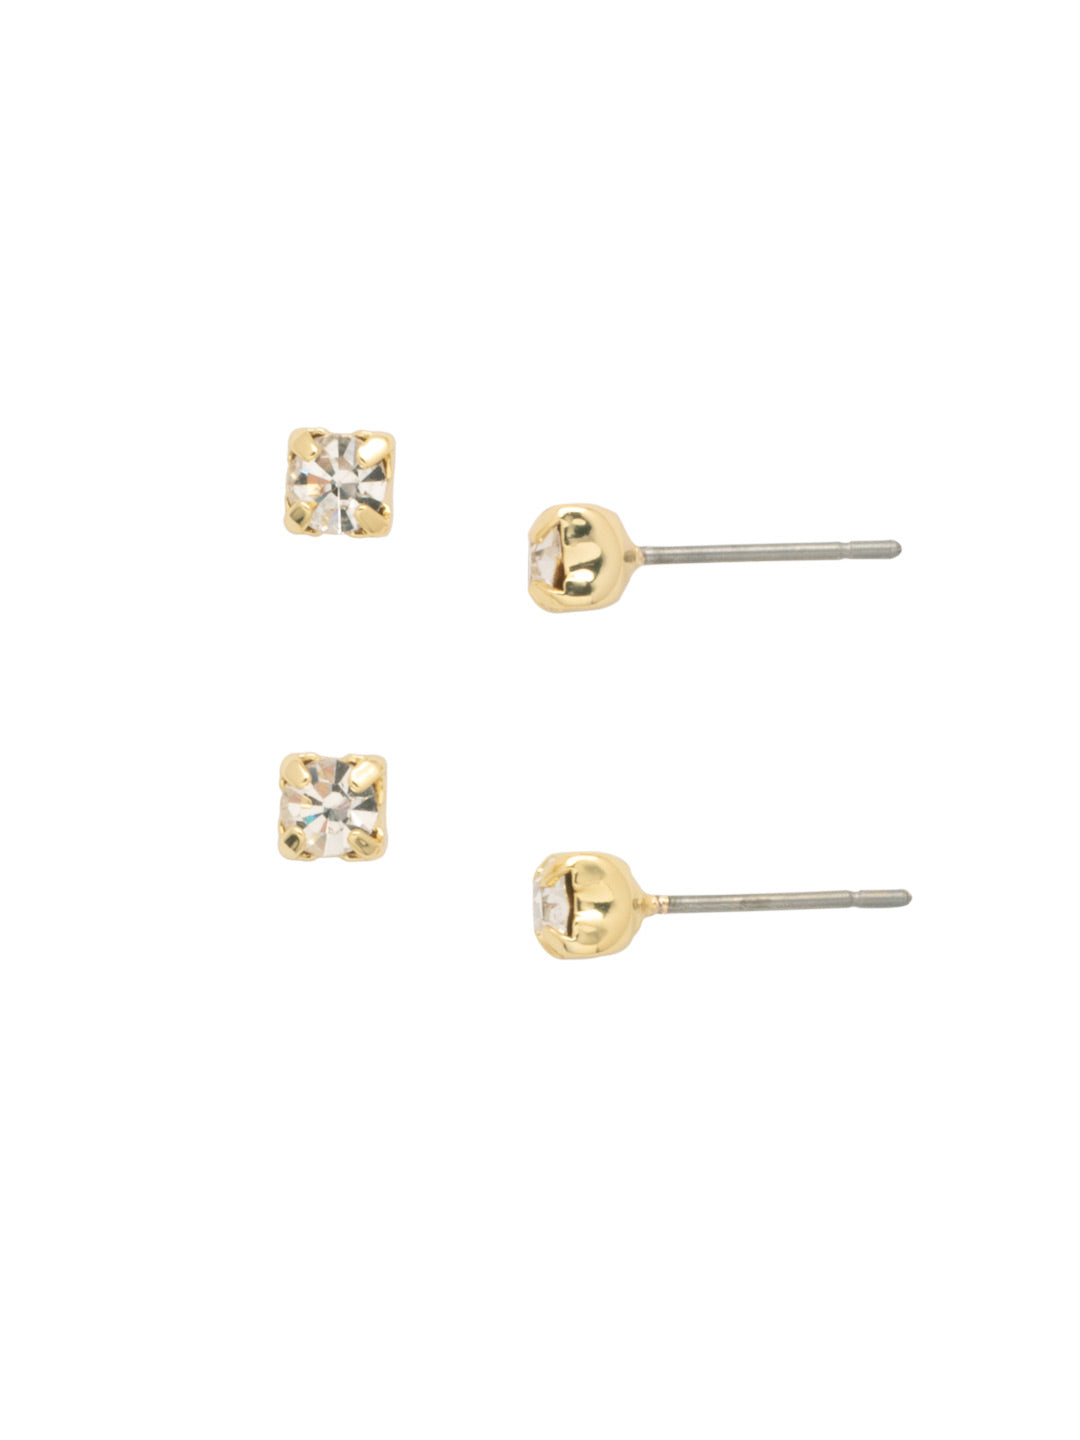 June Set Stud Earrings - EFM6BGCRY - <p>The June Set Stud Earrings feature two pairs of round-cut crystal studs. From Sorrelli's Crystal collection in our Bright Gold-tone finish.</p>